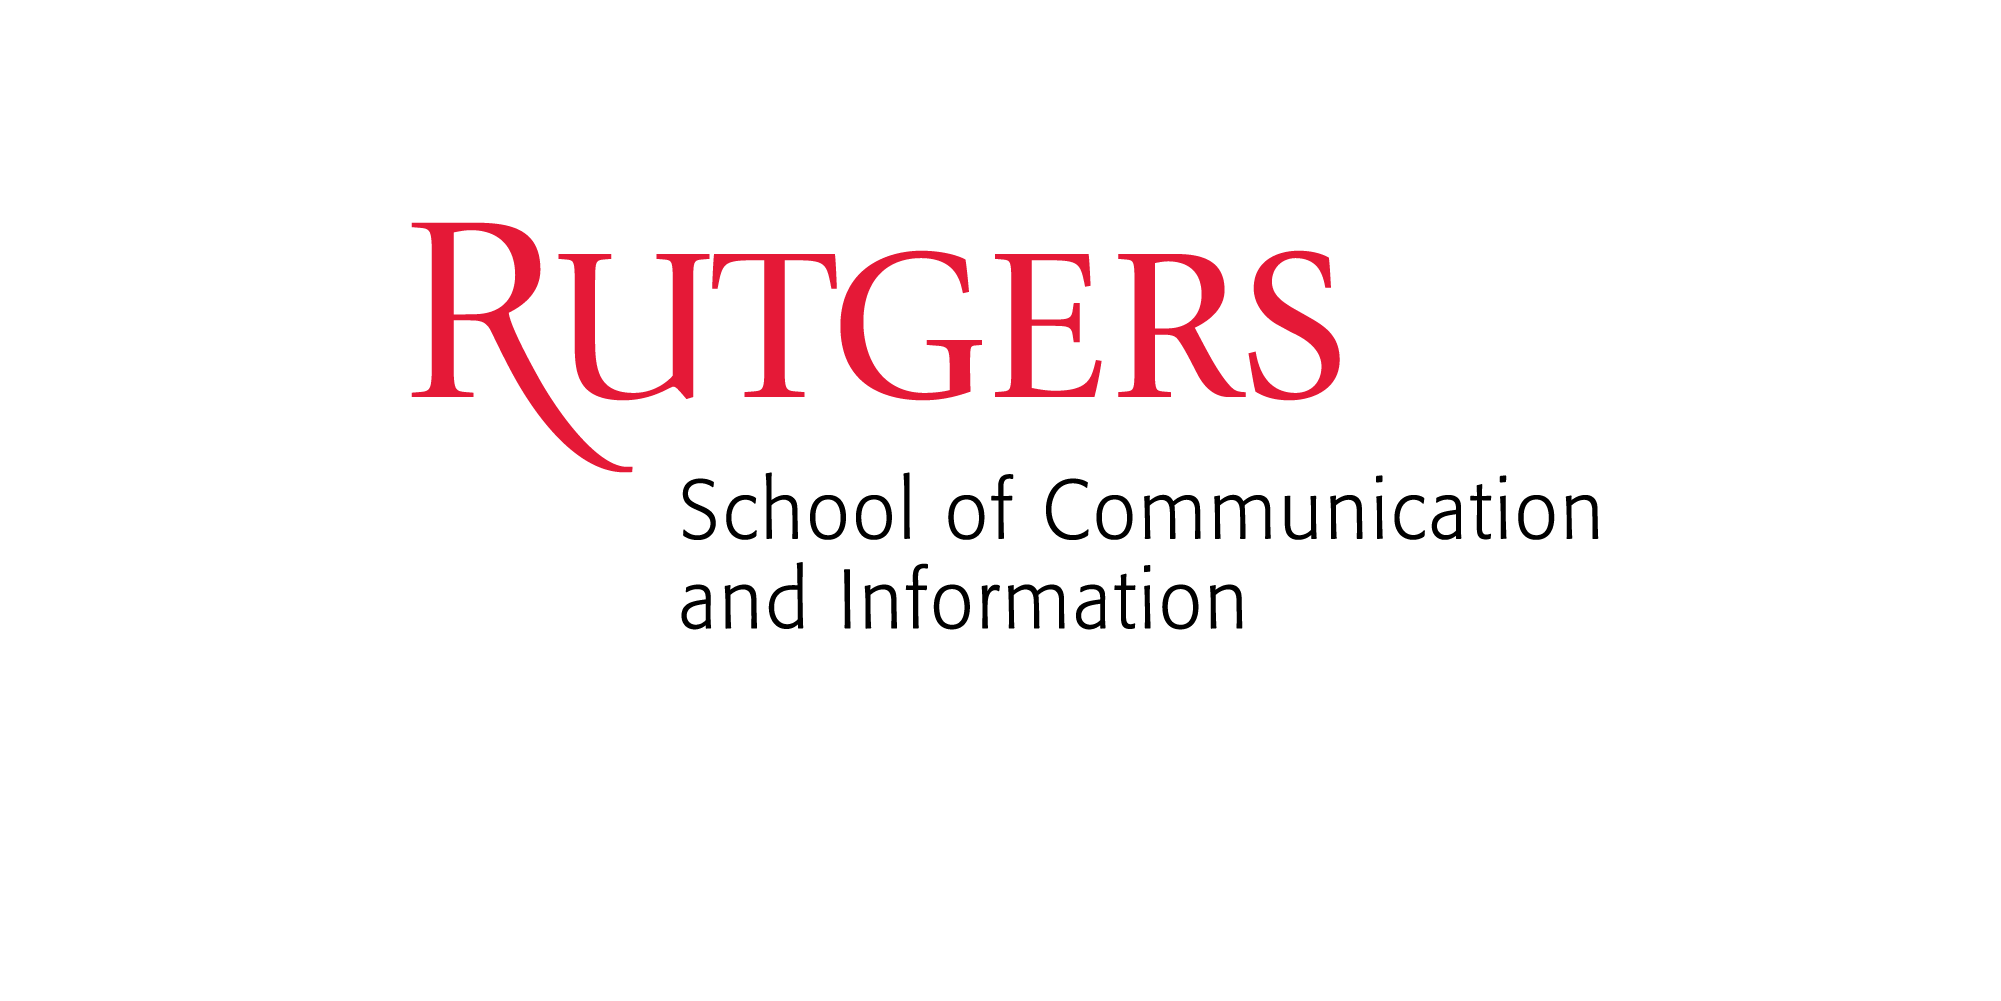 School of Communication and Information - Rutgers University